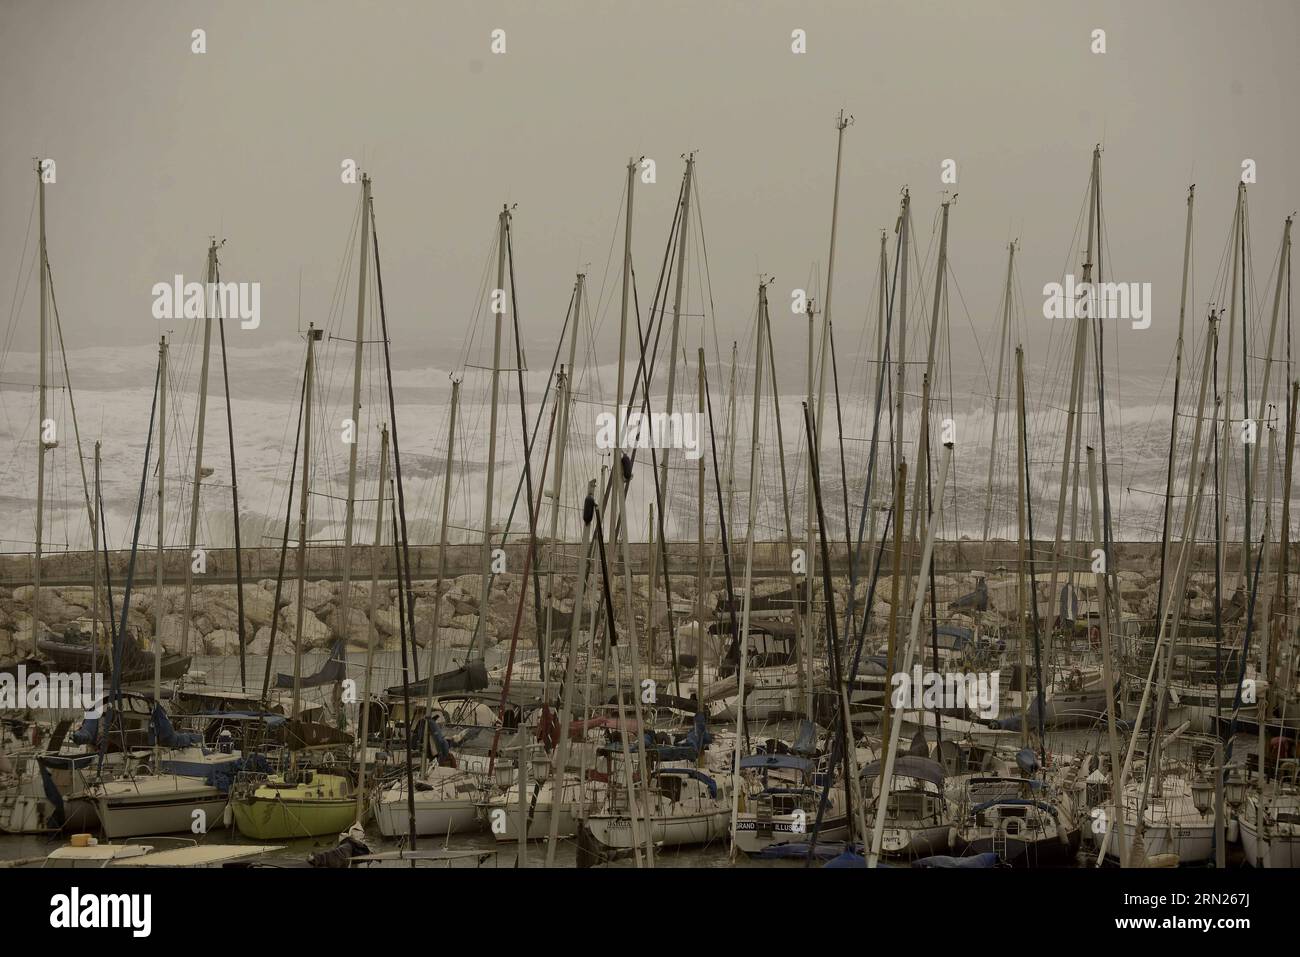 (150212) -- TEL AVIV,  Yachts are anchored due to a sandstorm in Tel Aviv, Israel, on Feb. 11, 2015. A sandstorm continues to blow hard in parts of the Middle East on Wednesday, where authorities have remained sea ports closed and briefly grounded flights. Israel has been hit by the developing sandstorm. The country temporarily shut down two airports and suspended all domestic flights Wednesday morning as the sandstorm hit the country, the Israel Airport Authority said in a statement. ) ISRAEL-TEL AVIV-STORM JINI/TomerxNeubeg PUBLICATIONxNOTxINxCHN   Tel Aviv Yachts are anchored Due to a sands Stock Photo